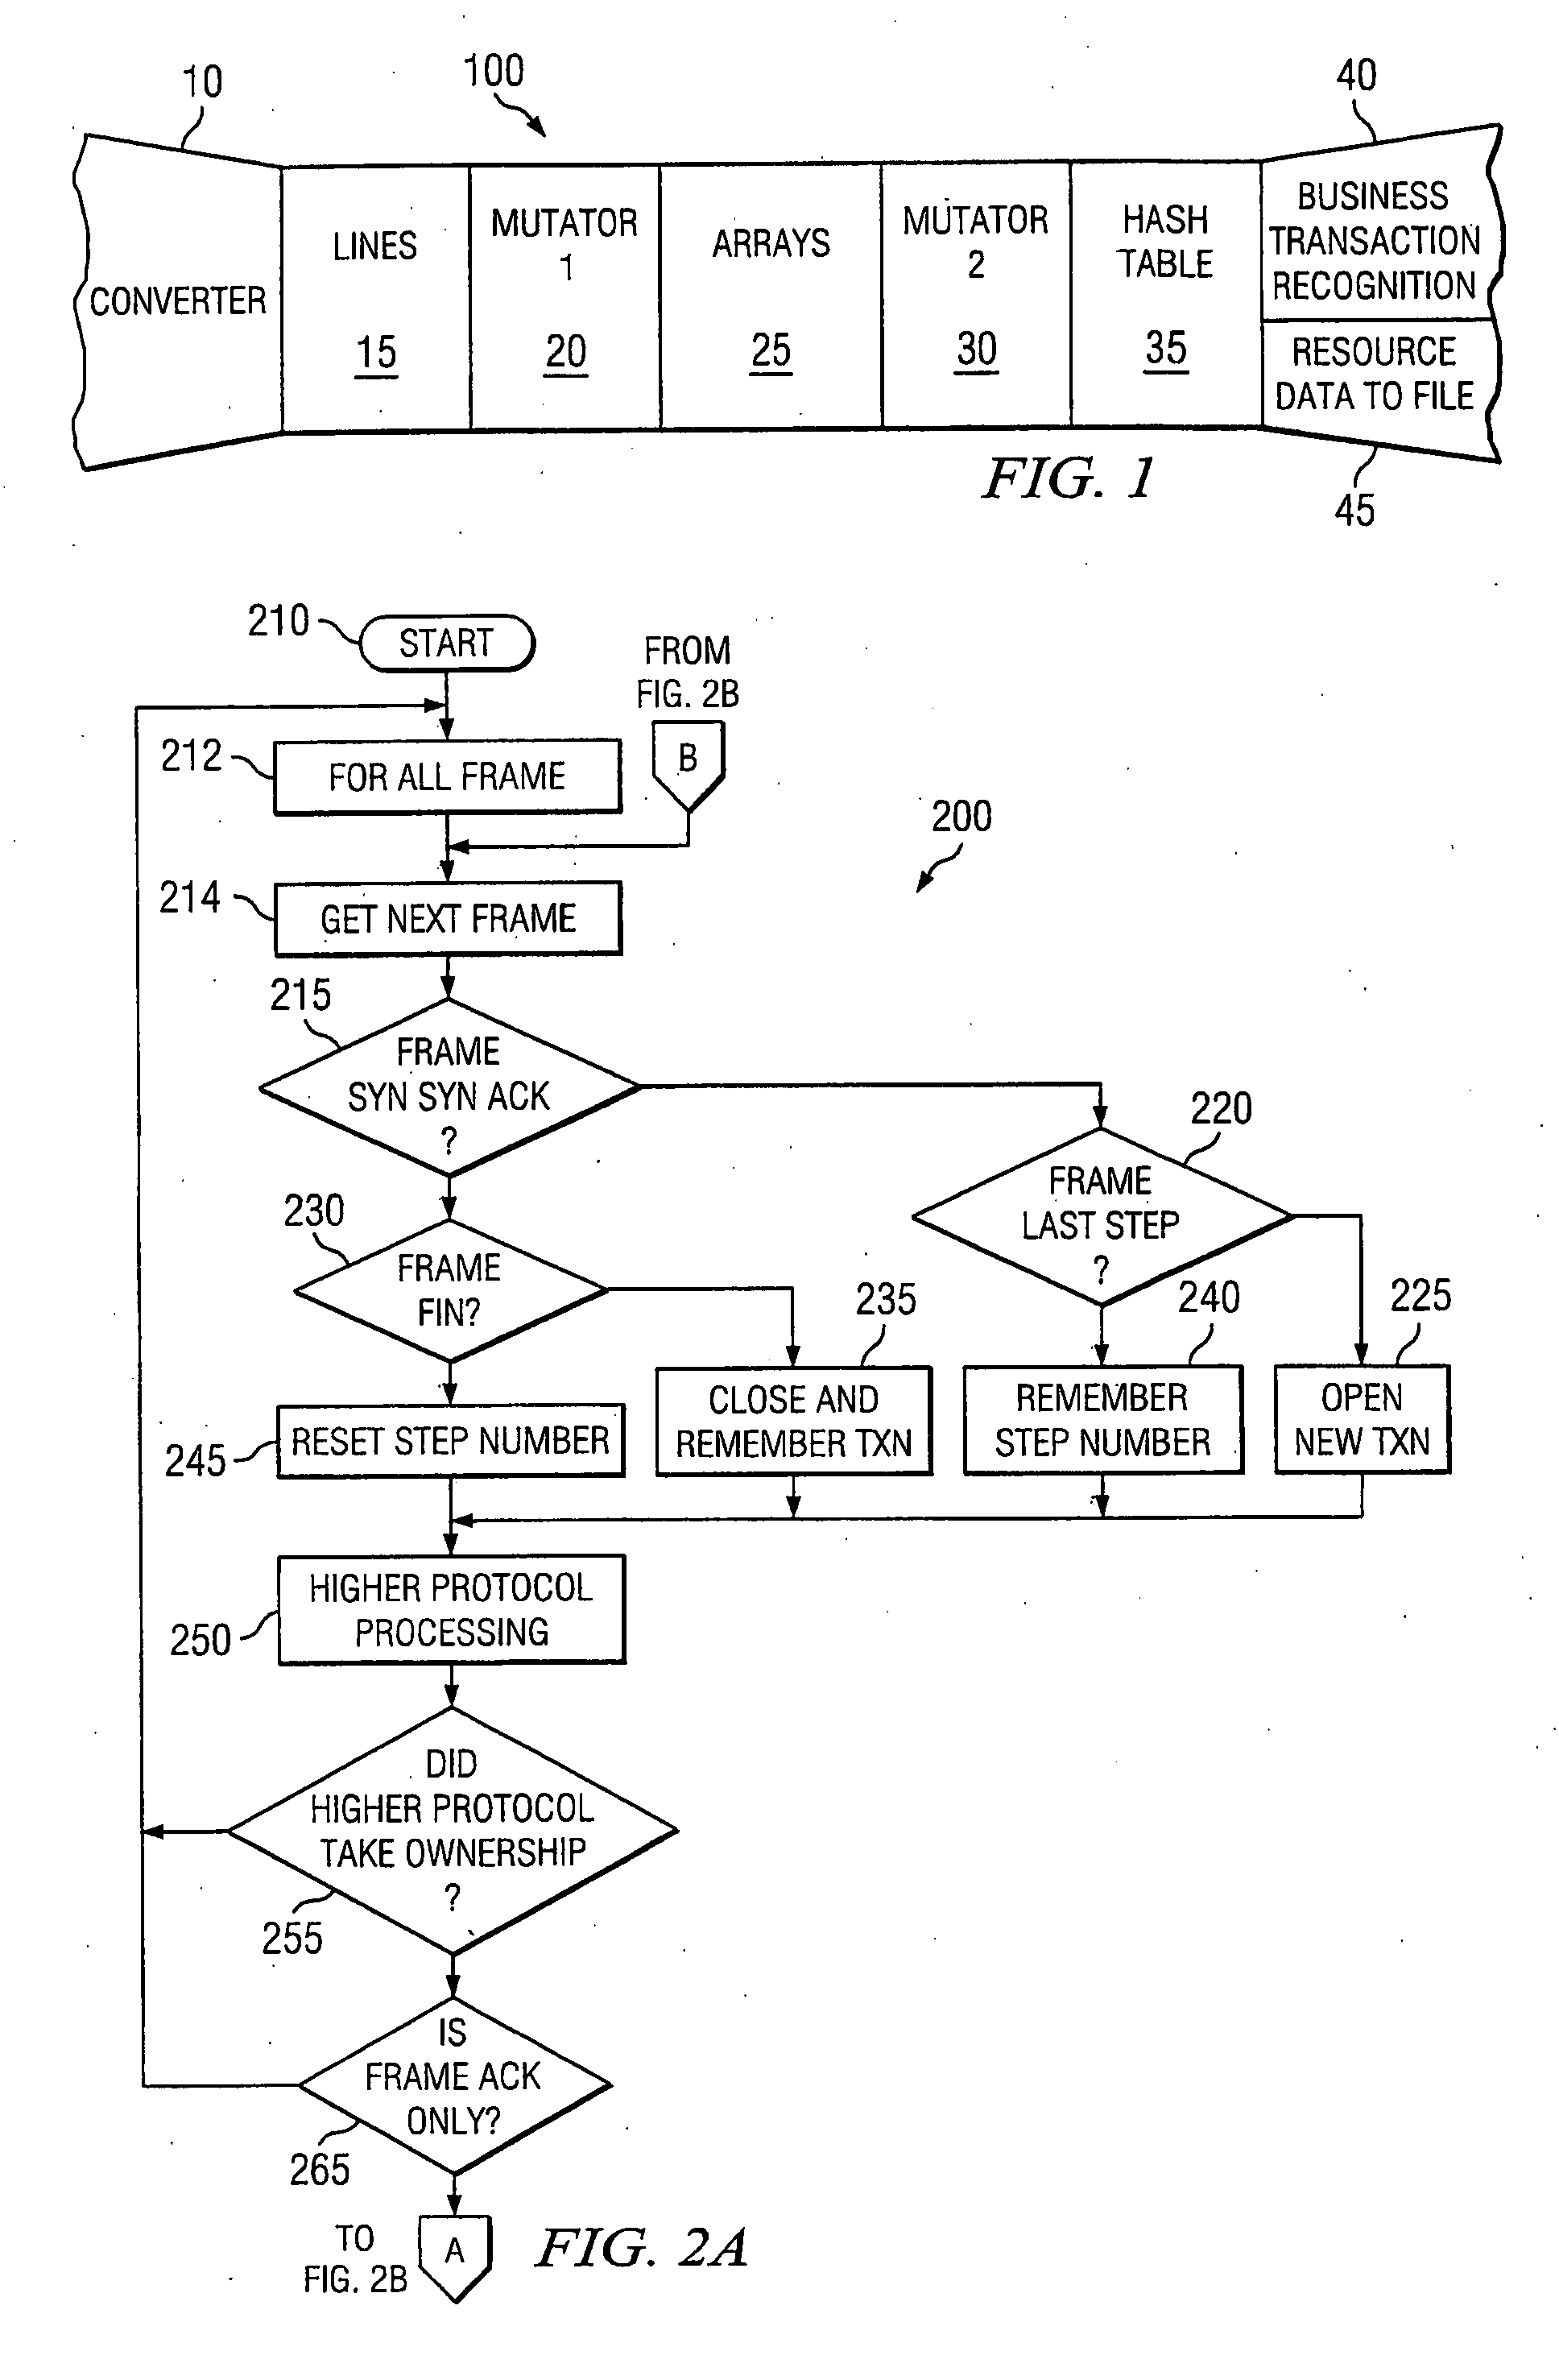 Method of semi-automatic data collection, data analysis, and model generation for the performance analysis of enterprise applications